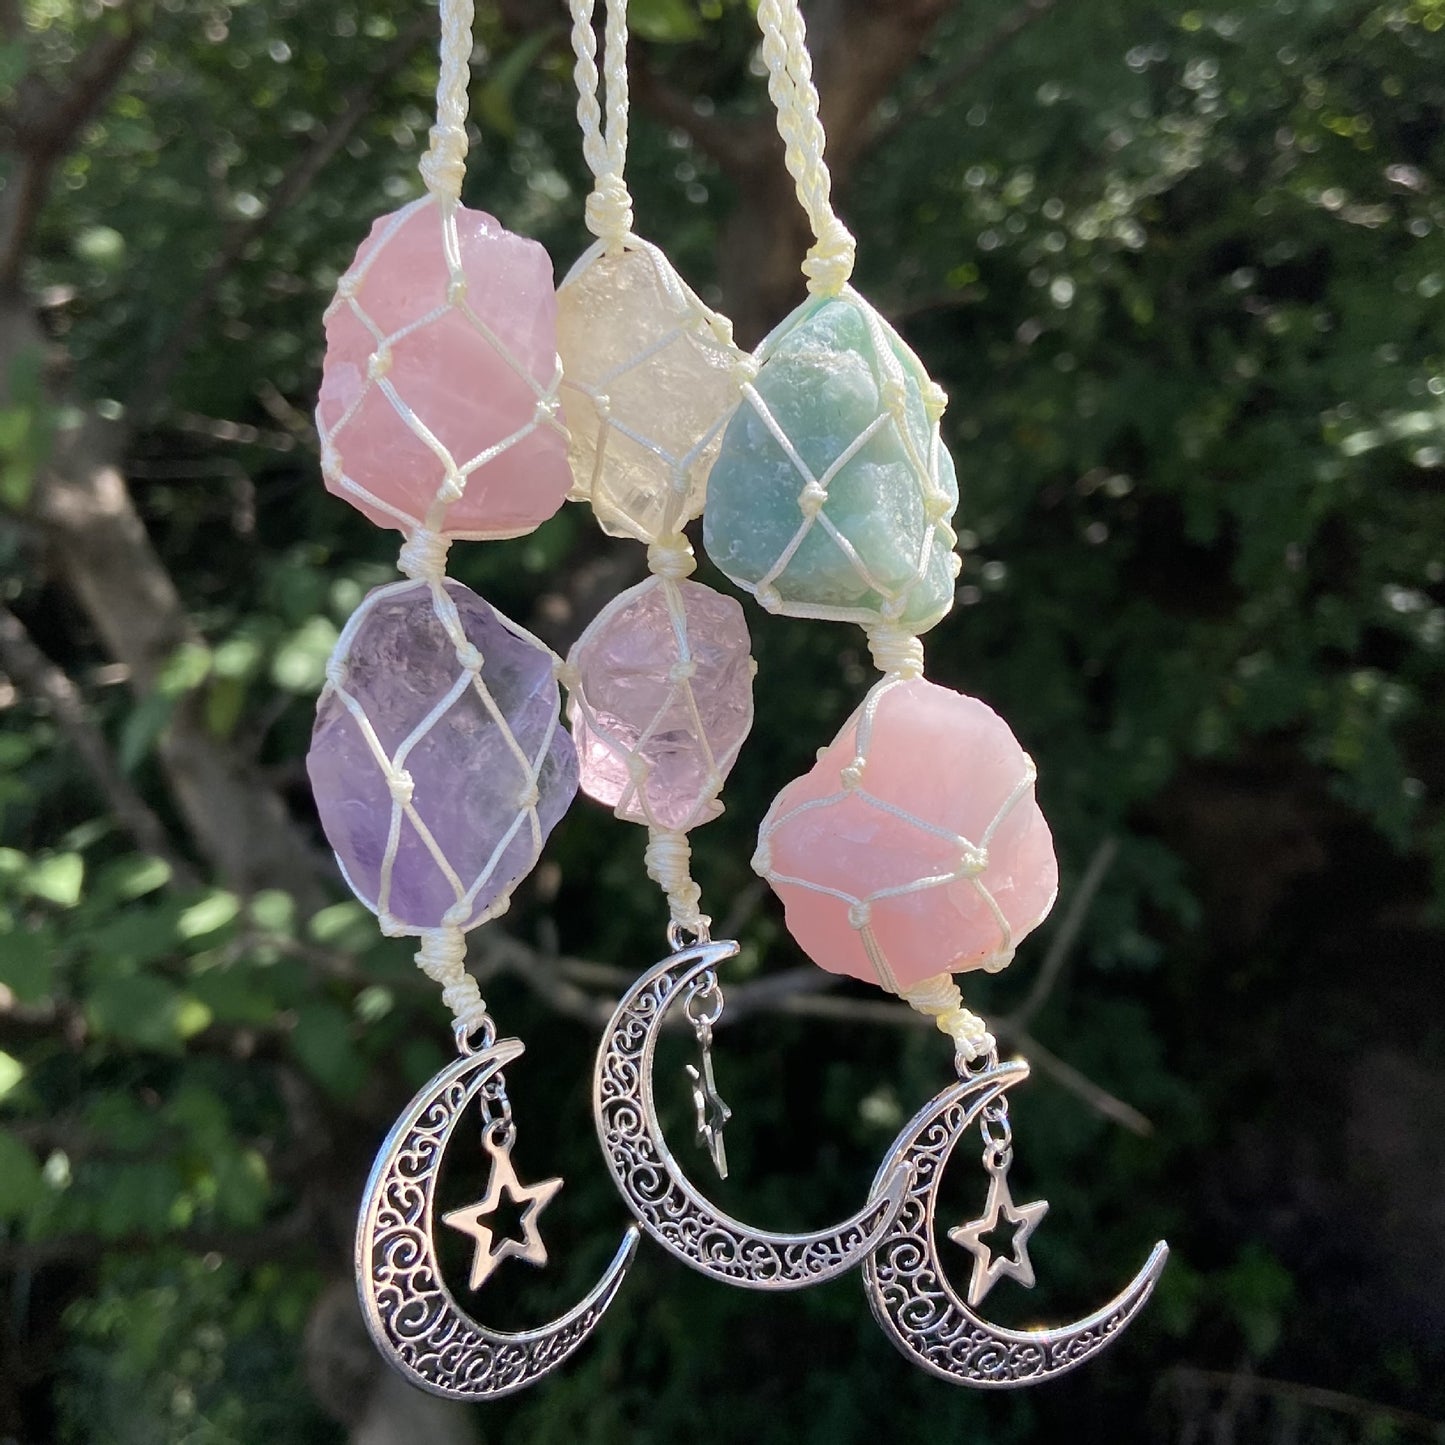 Colorful Handmade Double Natural Raw Stone Hanging Car Ornament Decor Home Indoor Decoration Ornaments With Moon Star Pendant